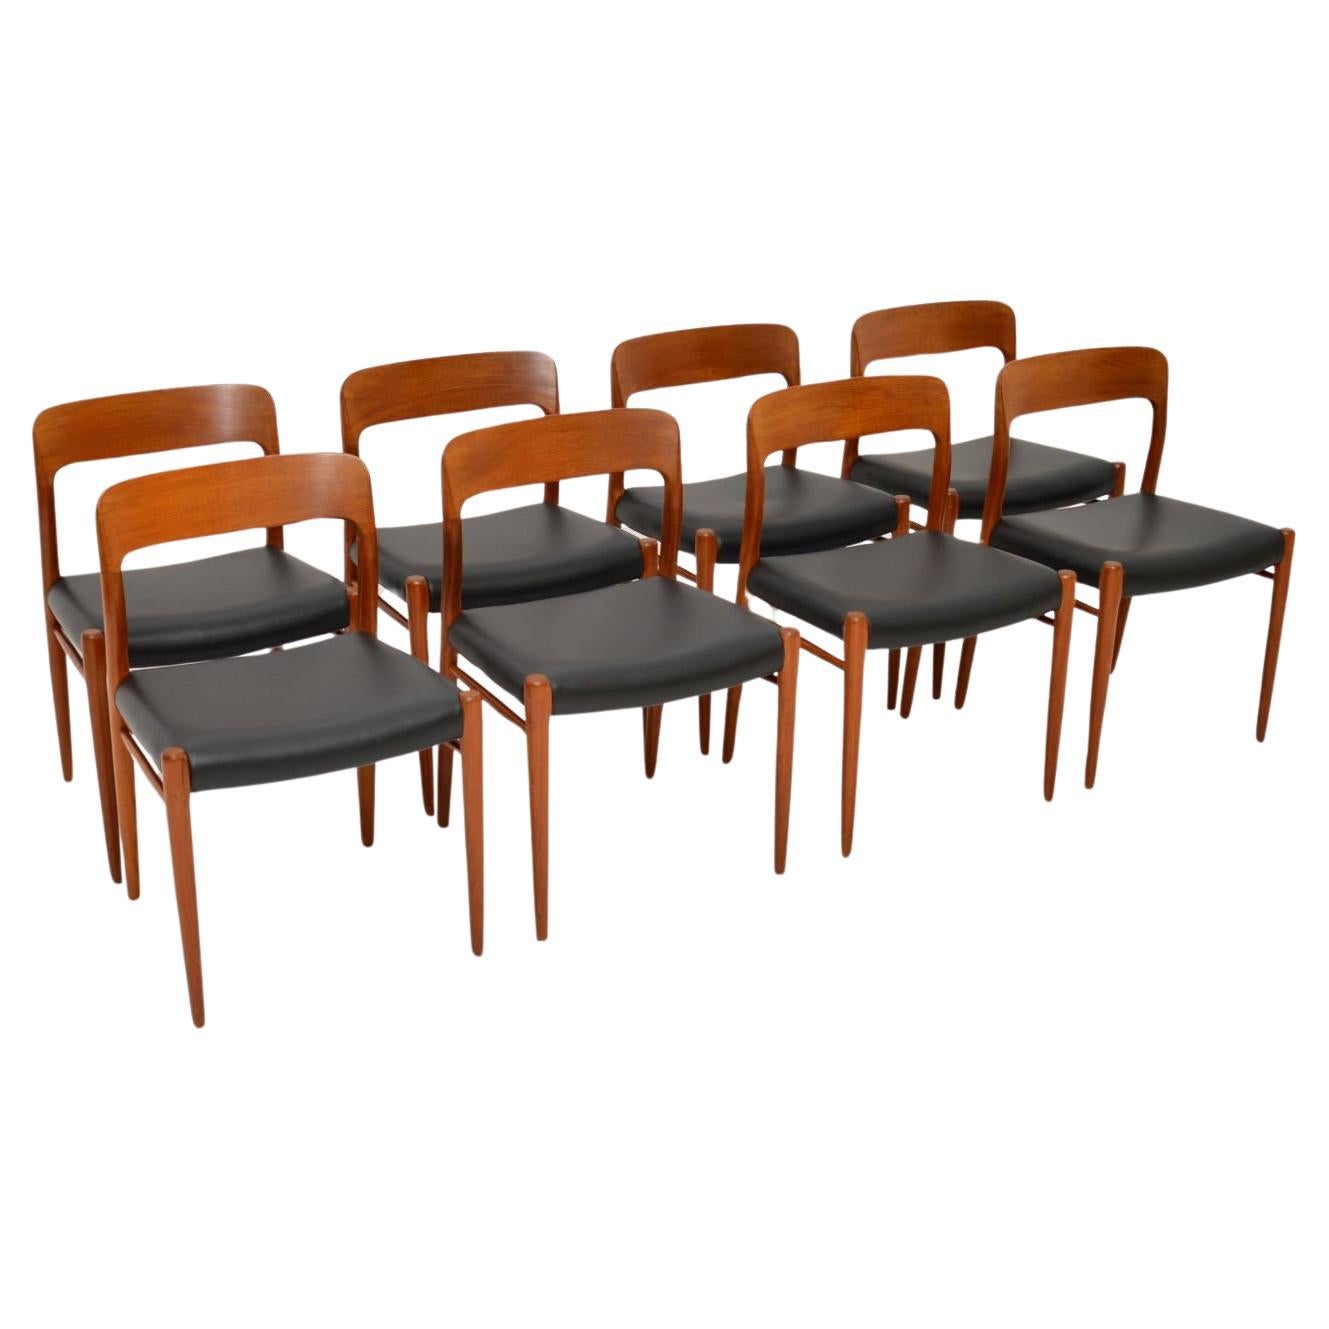 Set of 8 Teak and Leather Model 75 Dining Chairs by Niels Moller